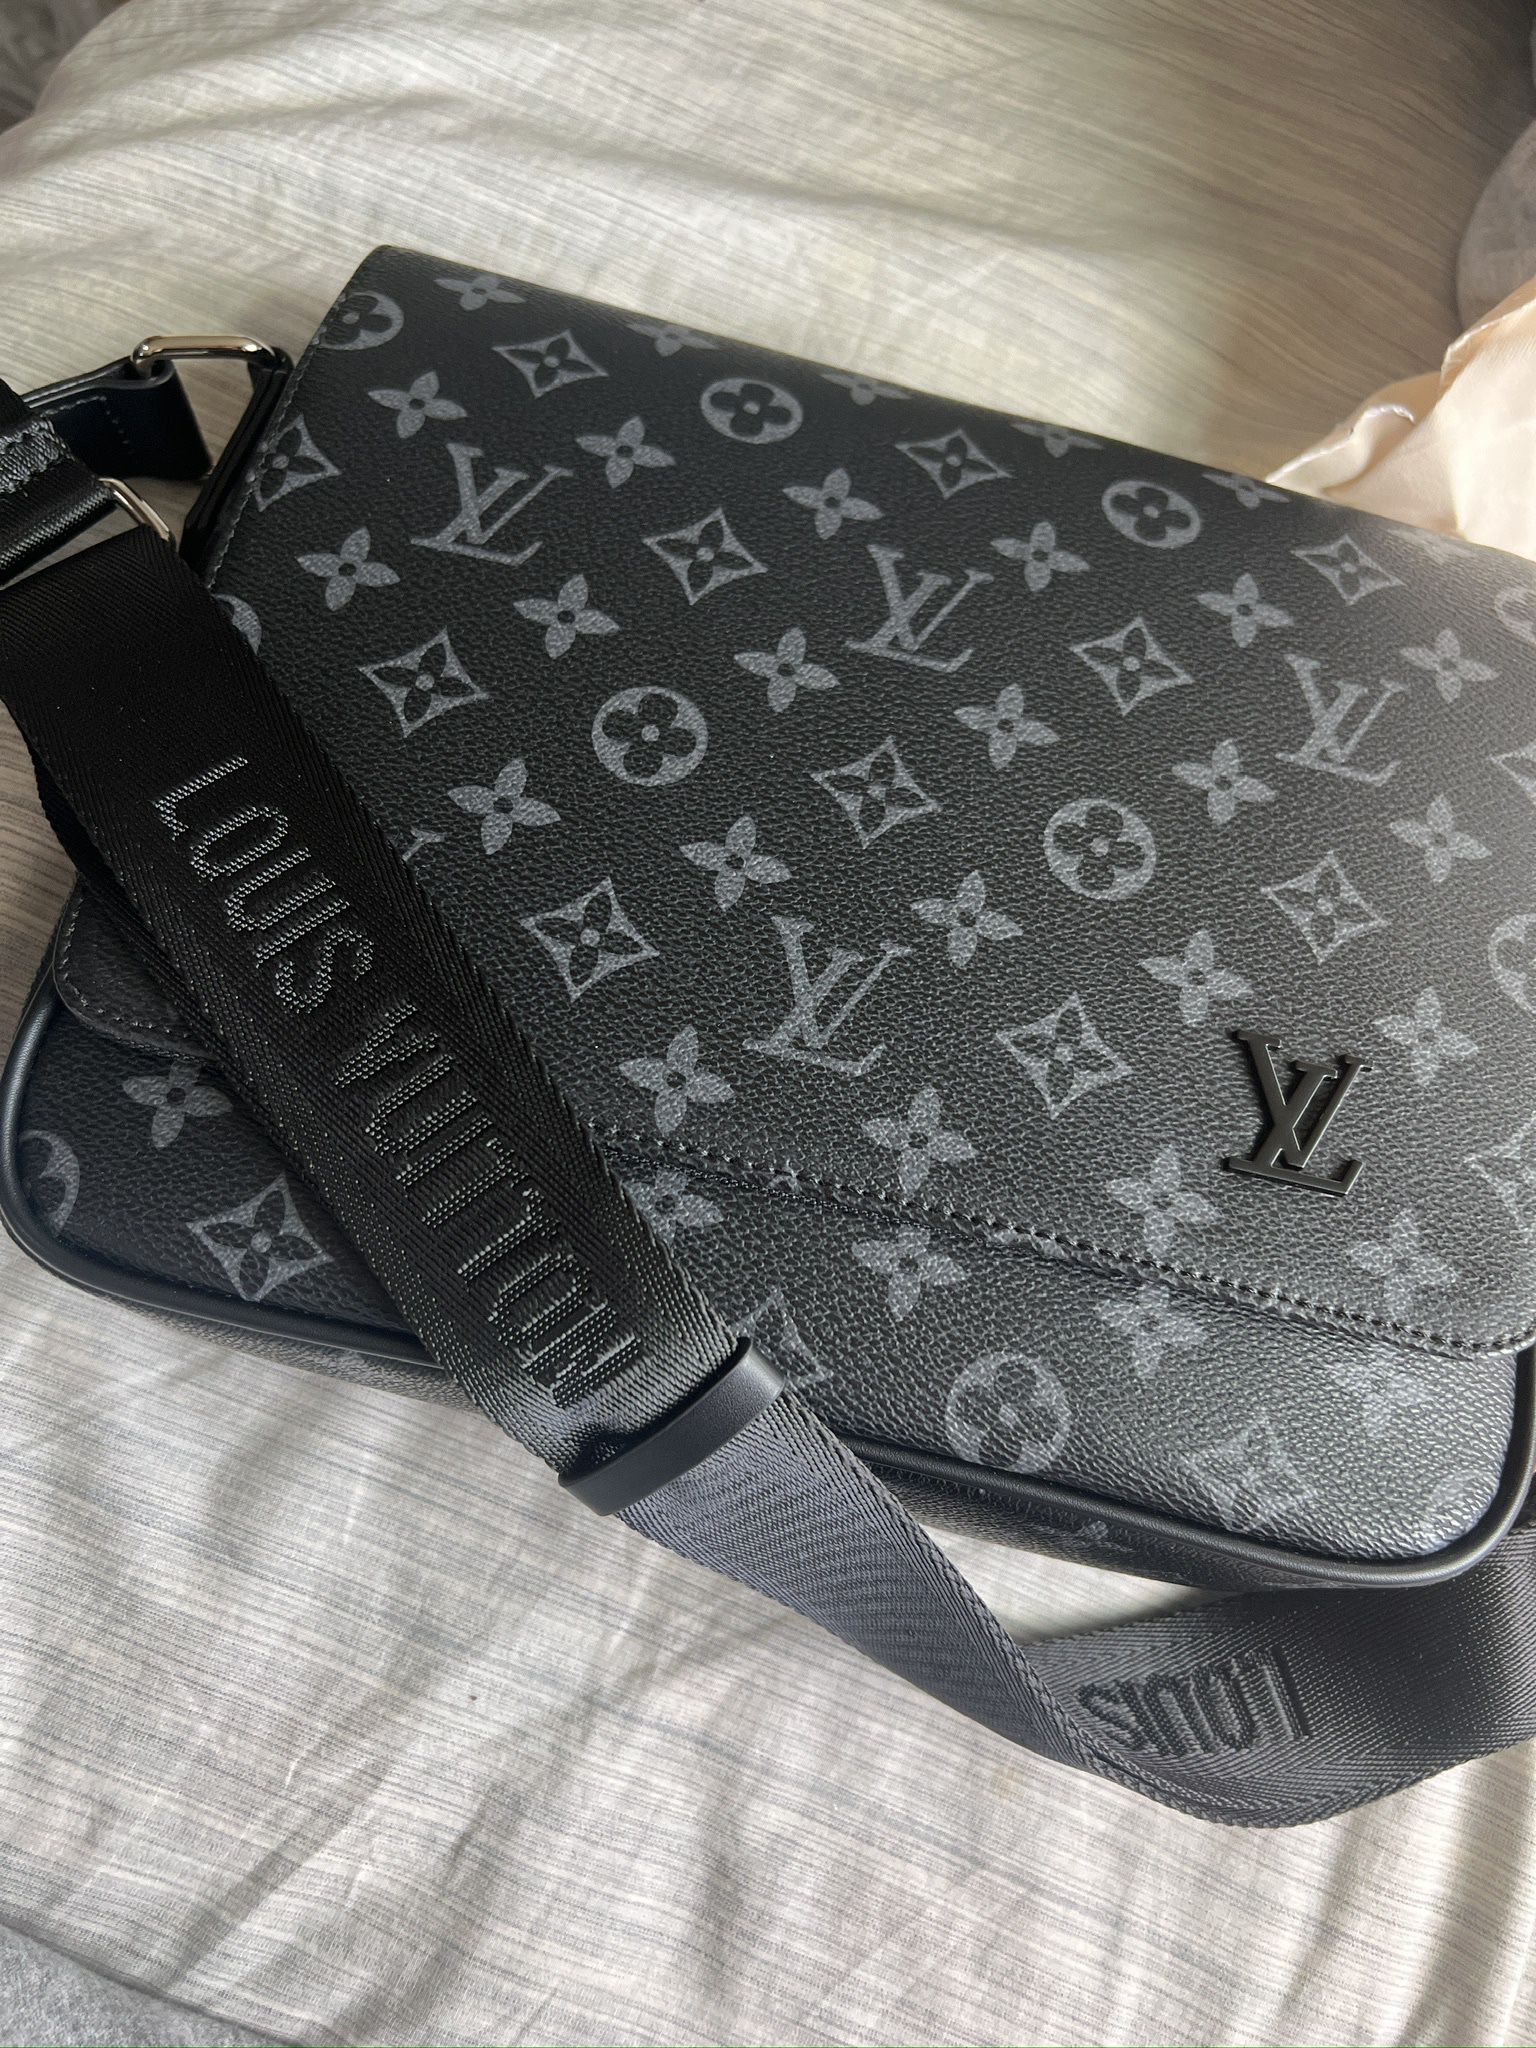 Louis Vuitton Duo Messenger Bag for Sale in San Diego, CA - OfferUp